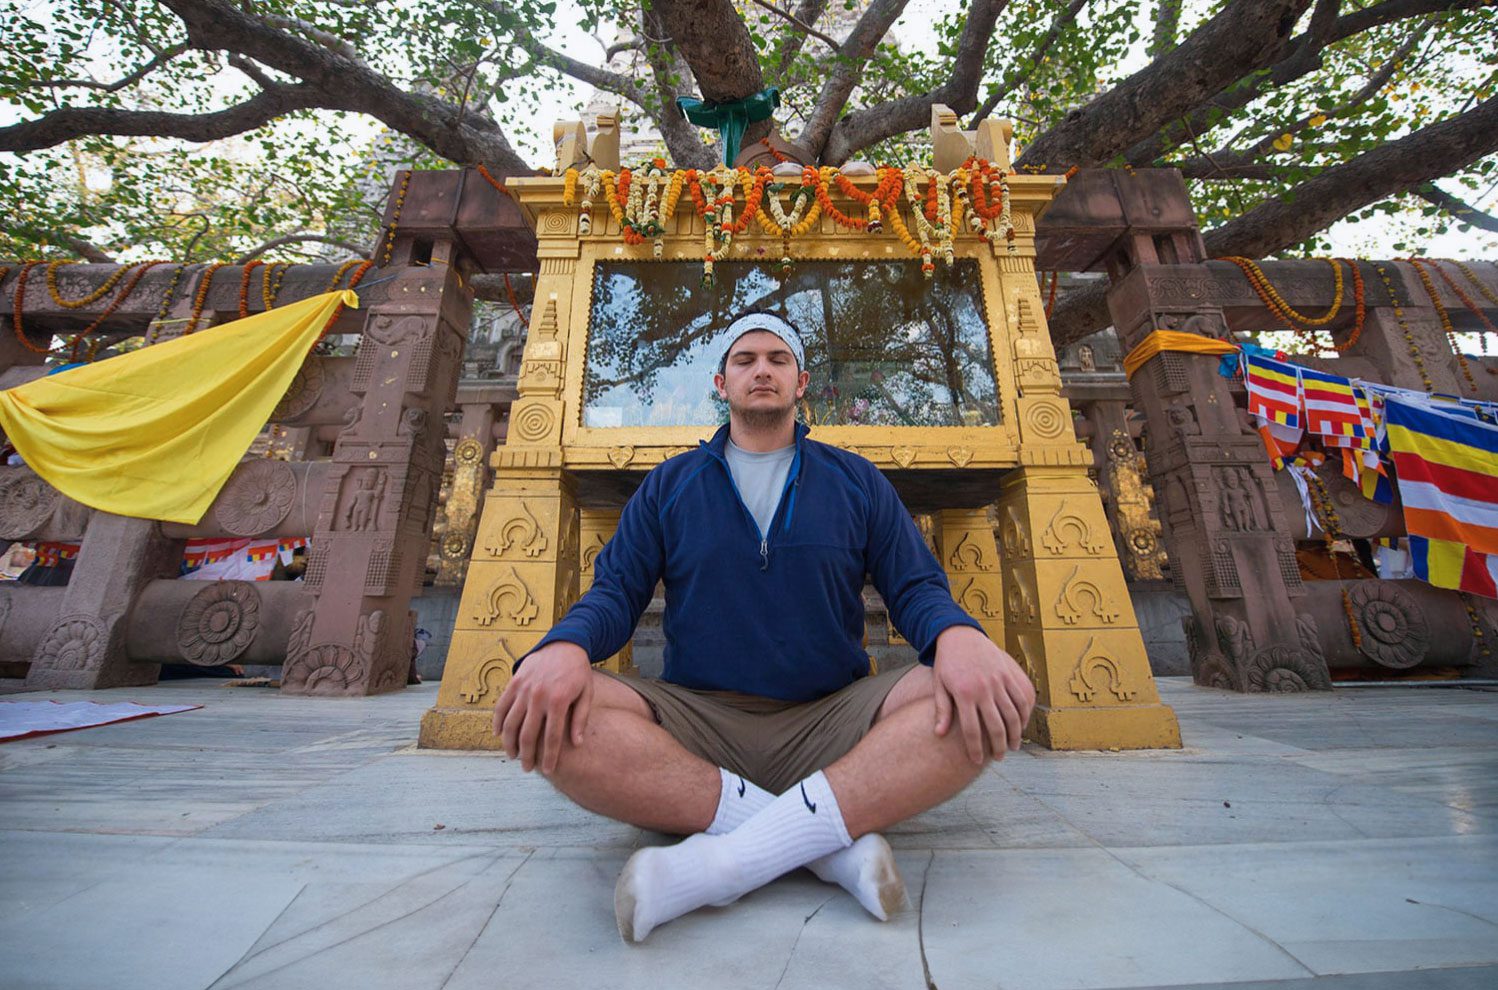 A young man crosses his legs and meditates in a sitting position.